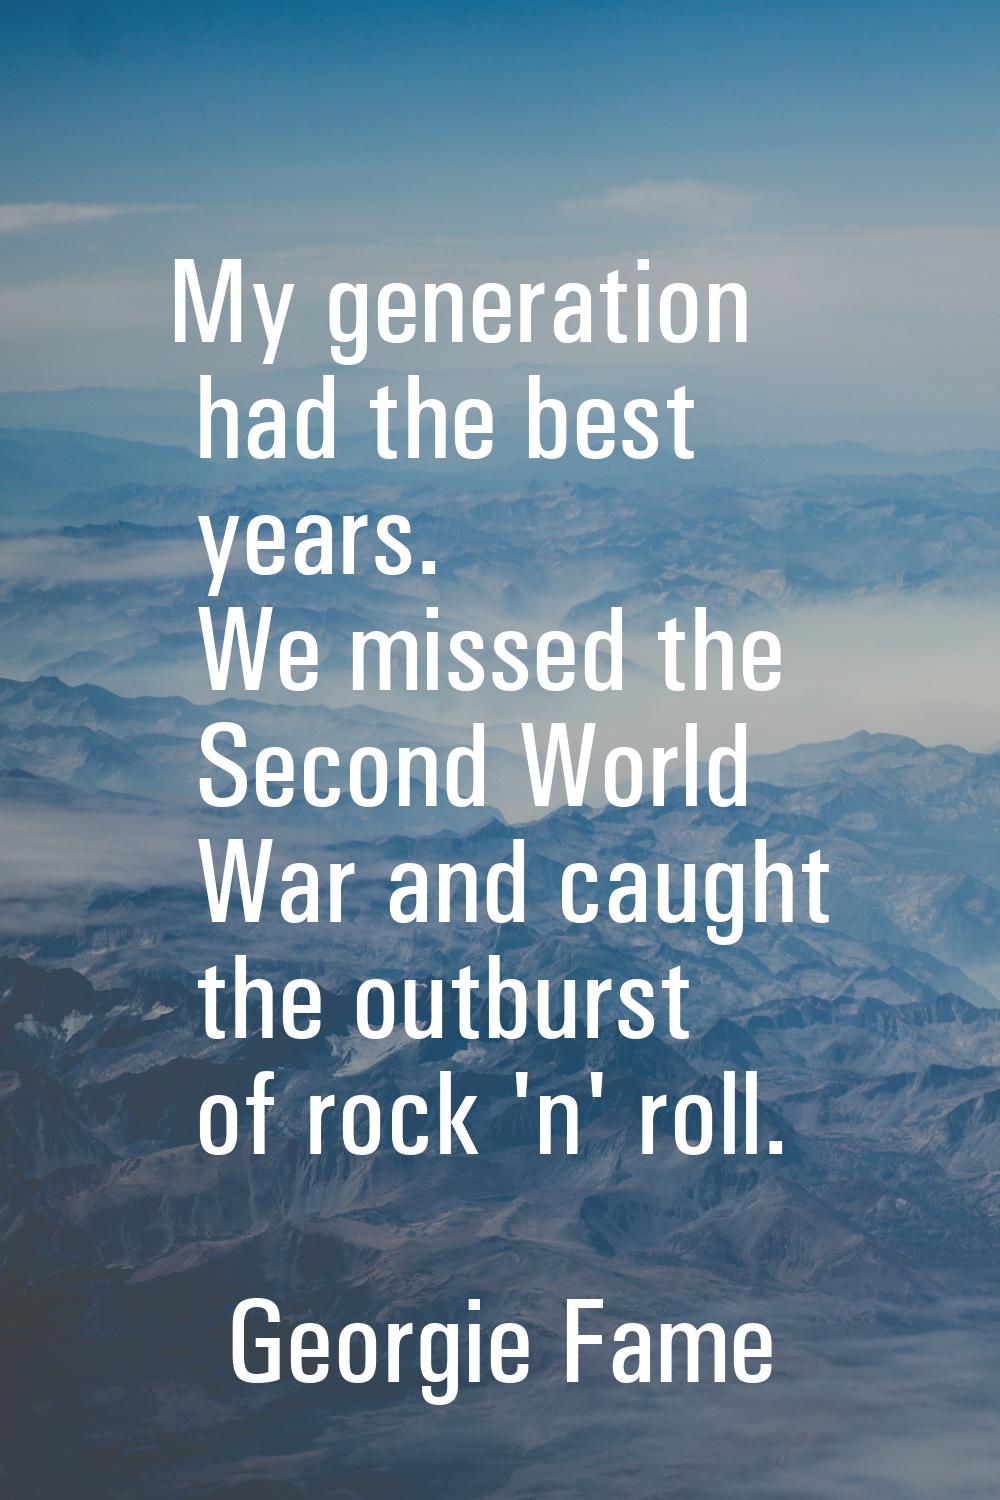 My generation had the best years. We missed the Second World War and caught the outburst of rock 'n